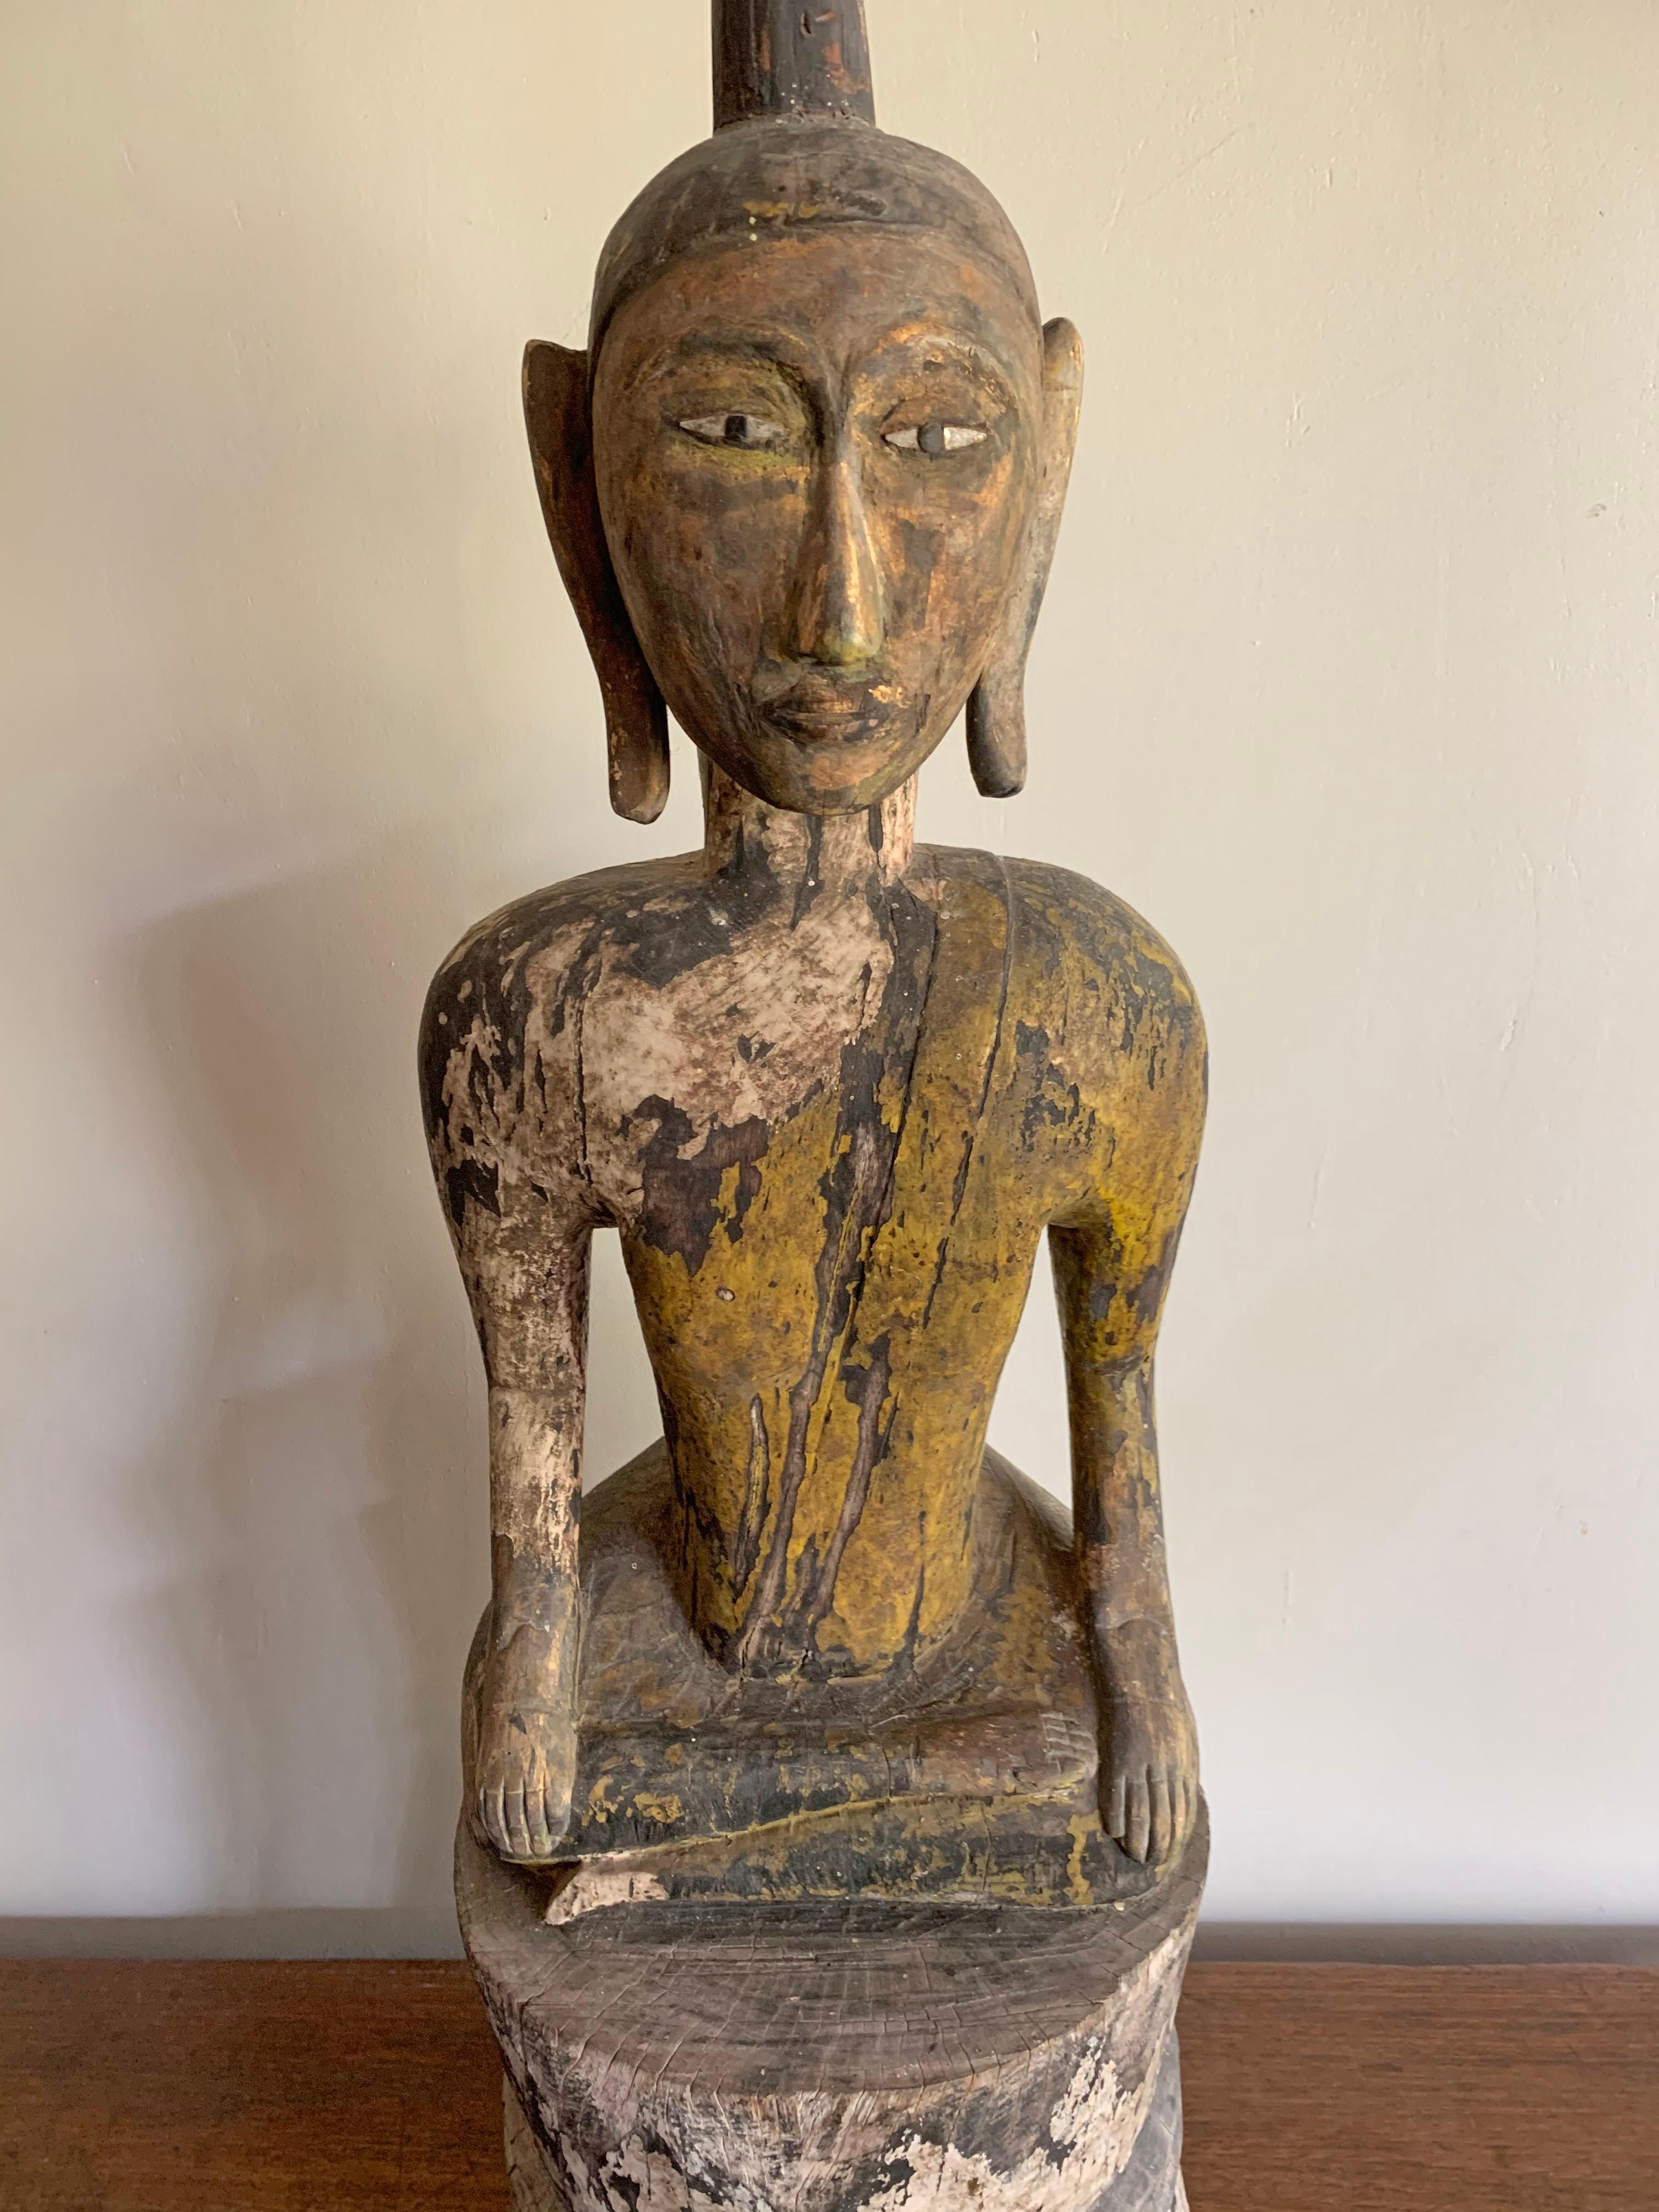 This buddha is a hand-carved from wood and originates from Burma, modern day Myanmar. It once featured an elaborate lacquer finish, however much of this has worn away over the decades. There are traces of the original black and yellow lacquer. The